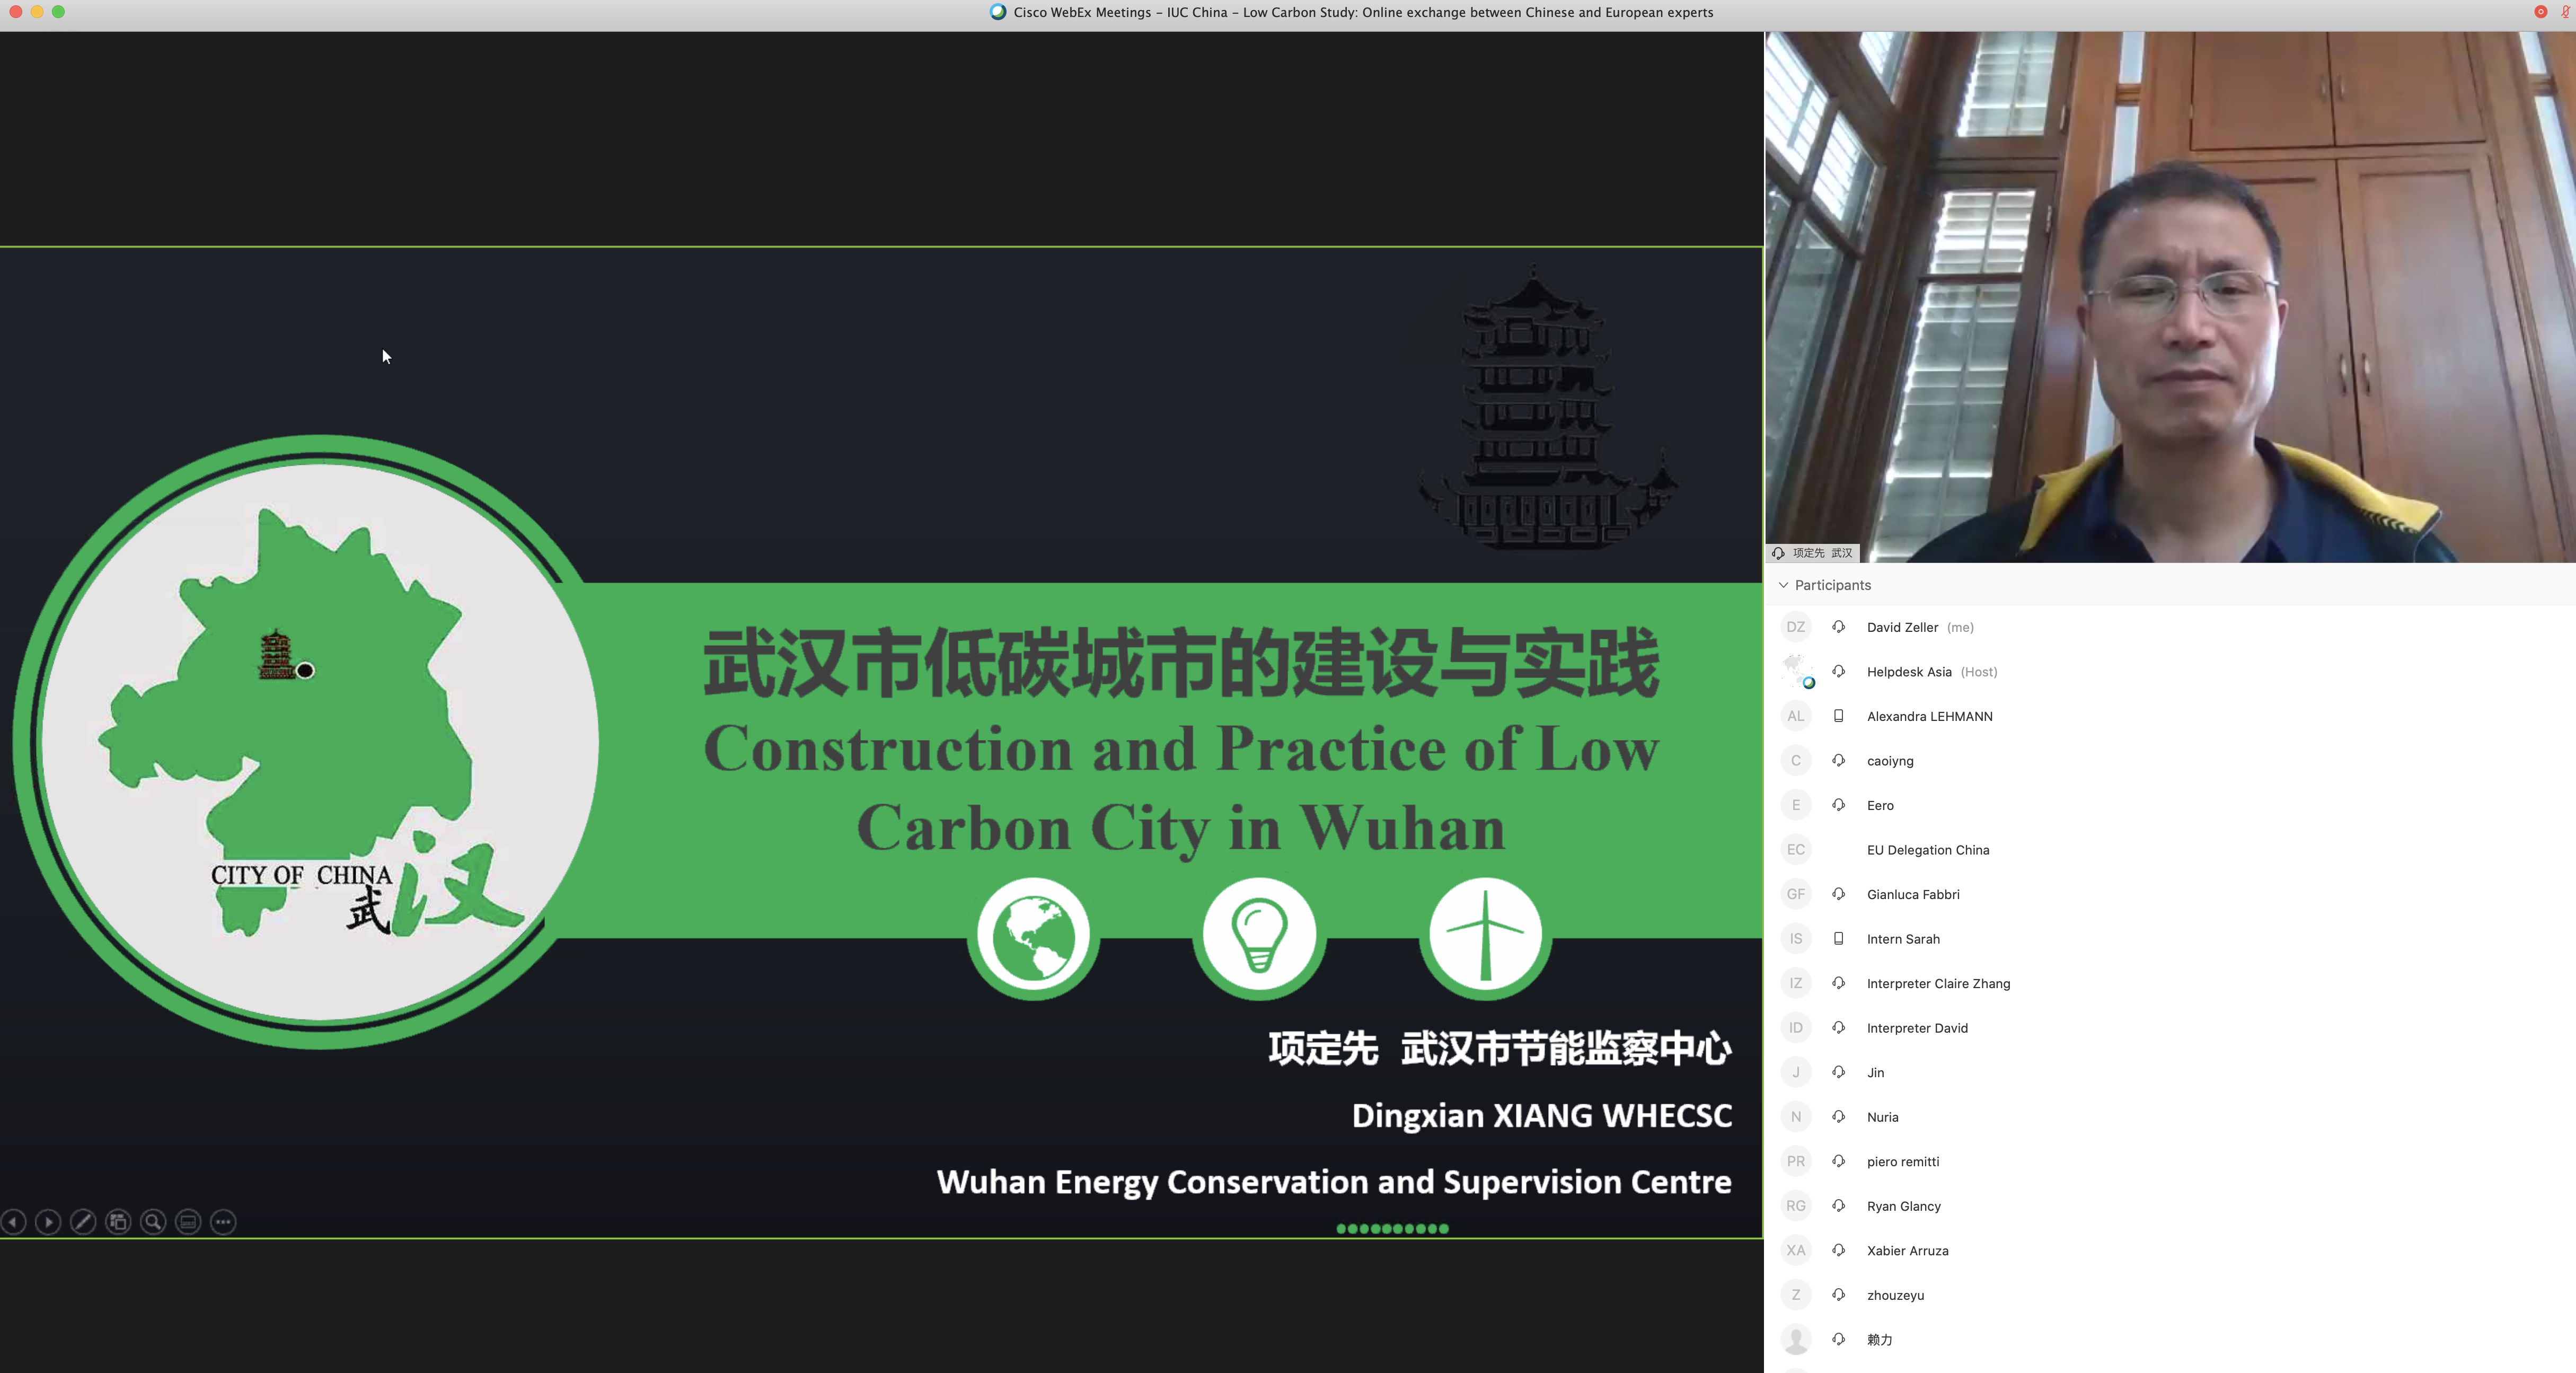 EU-China Low Carbon Cities Study online session held today between Chinese and European experts